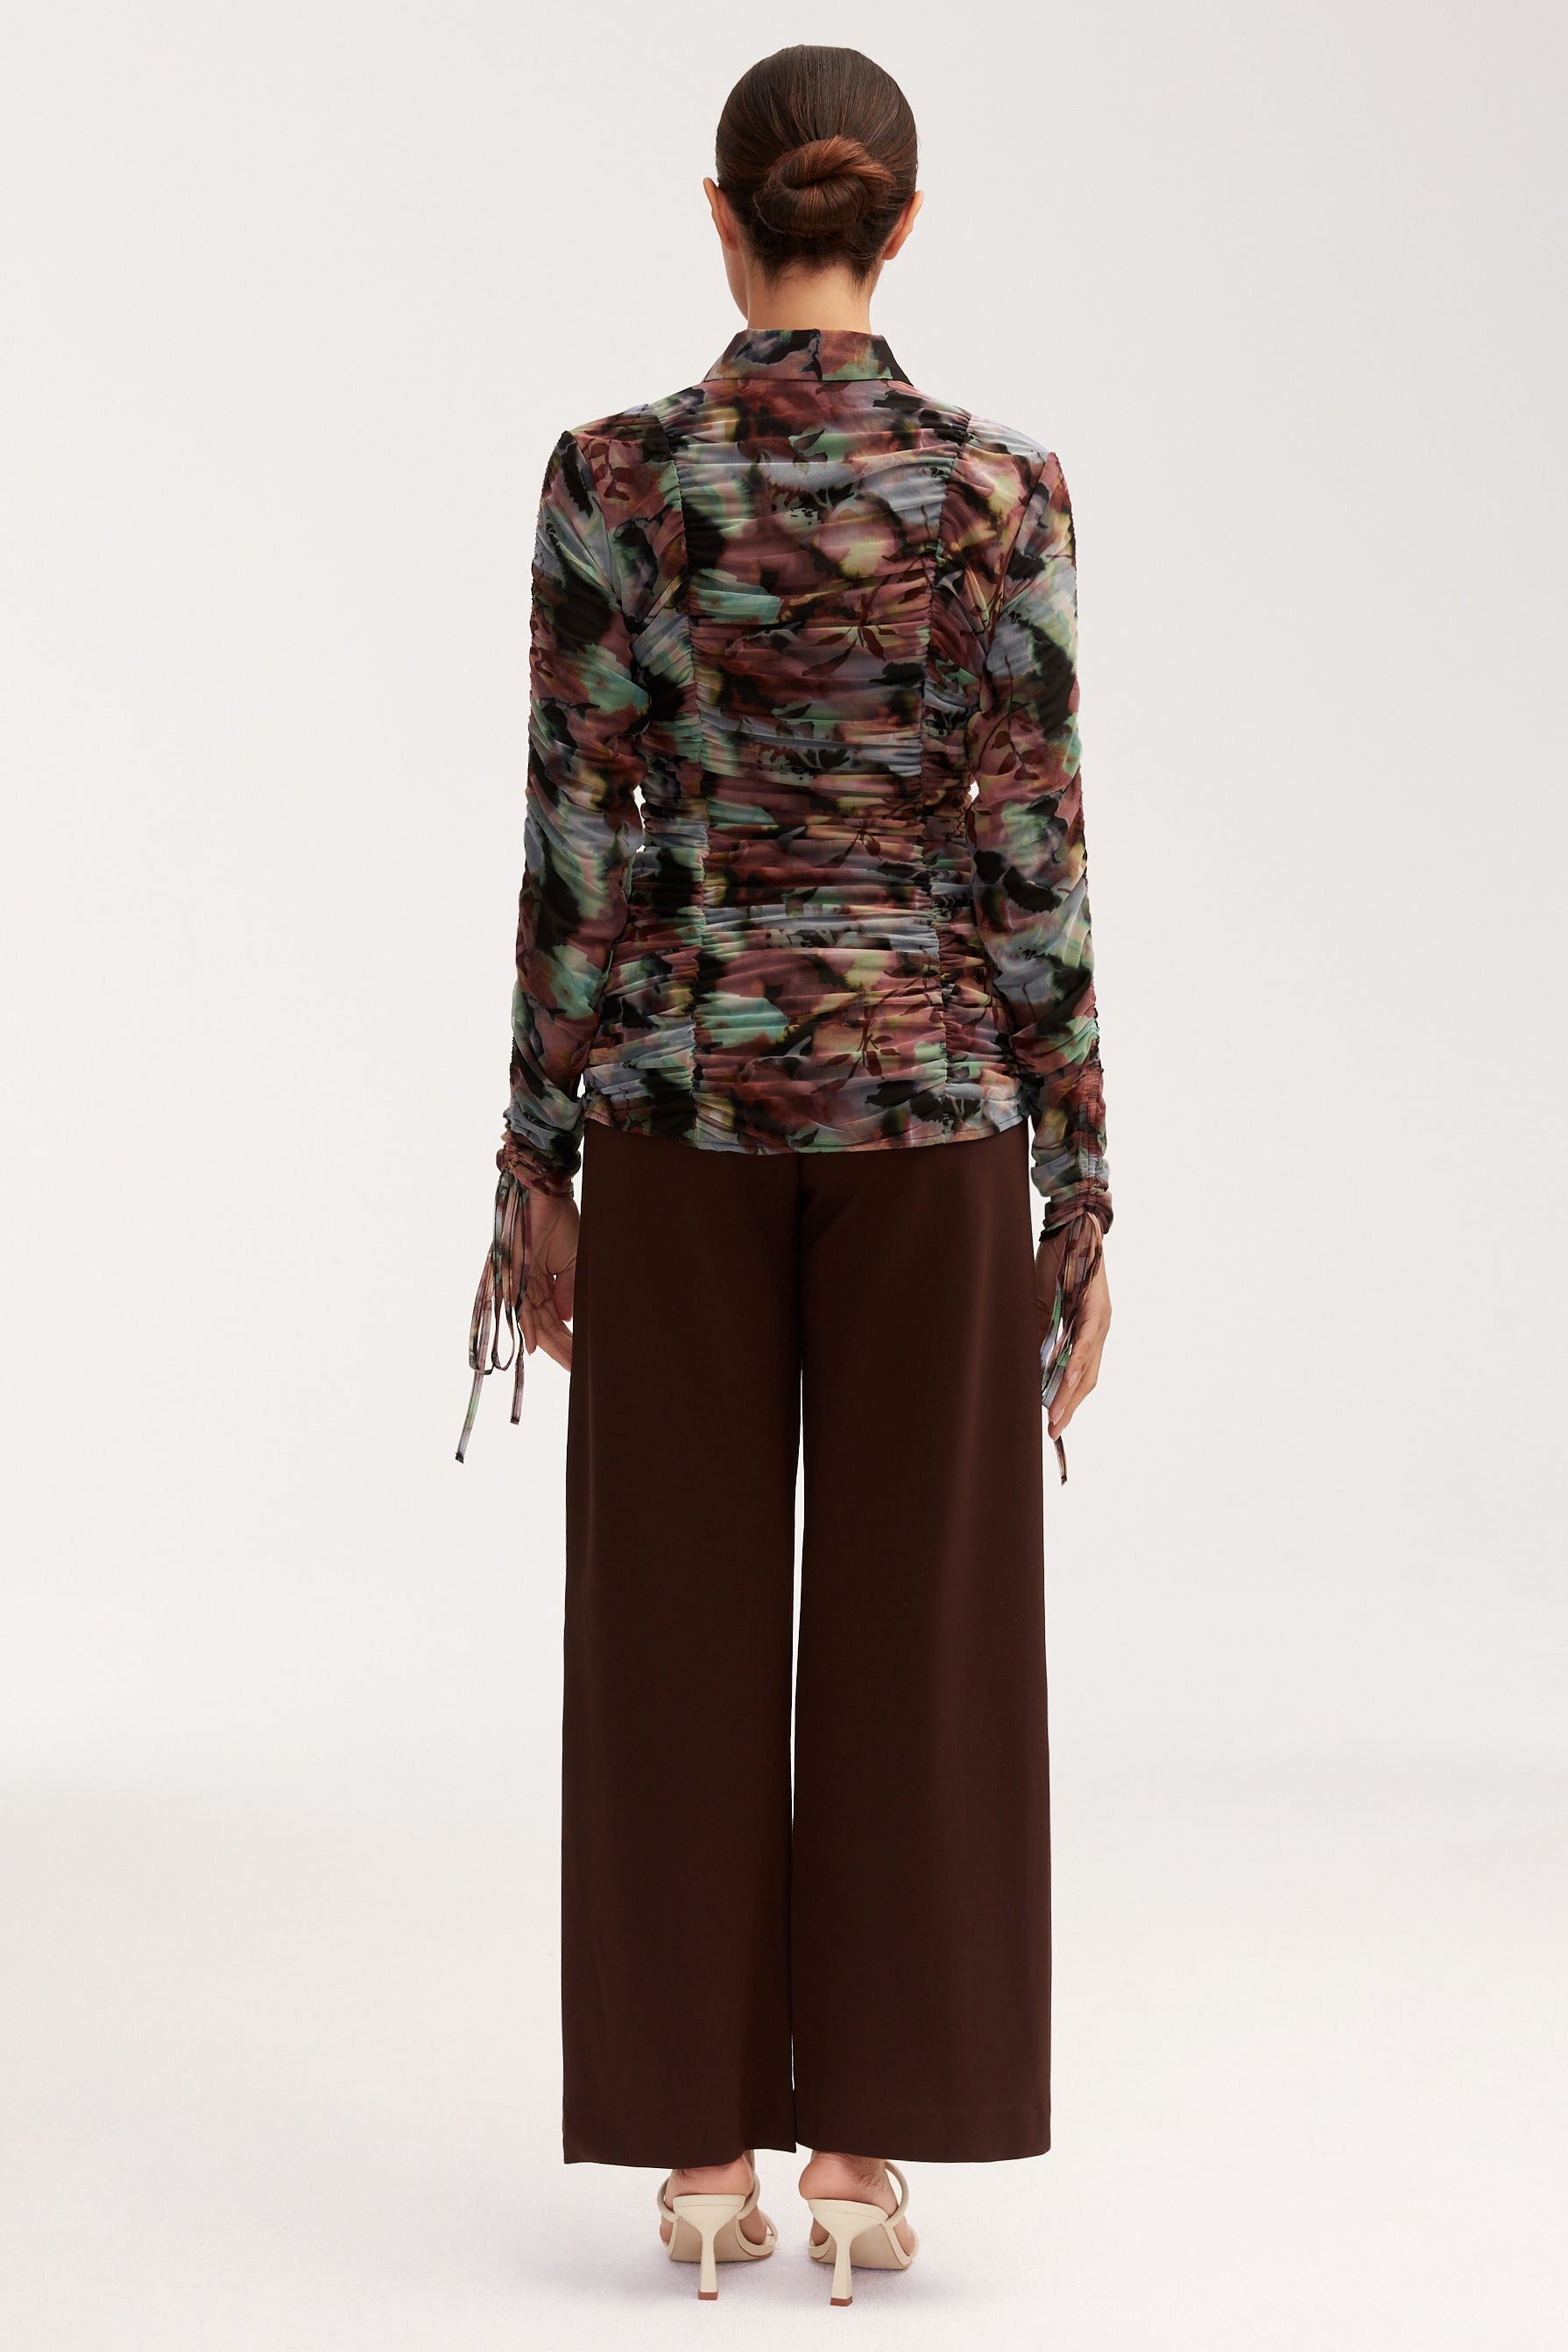 Mesh Button Down Top - Floral Tie Dye Tops Veiled 